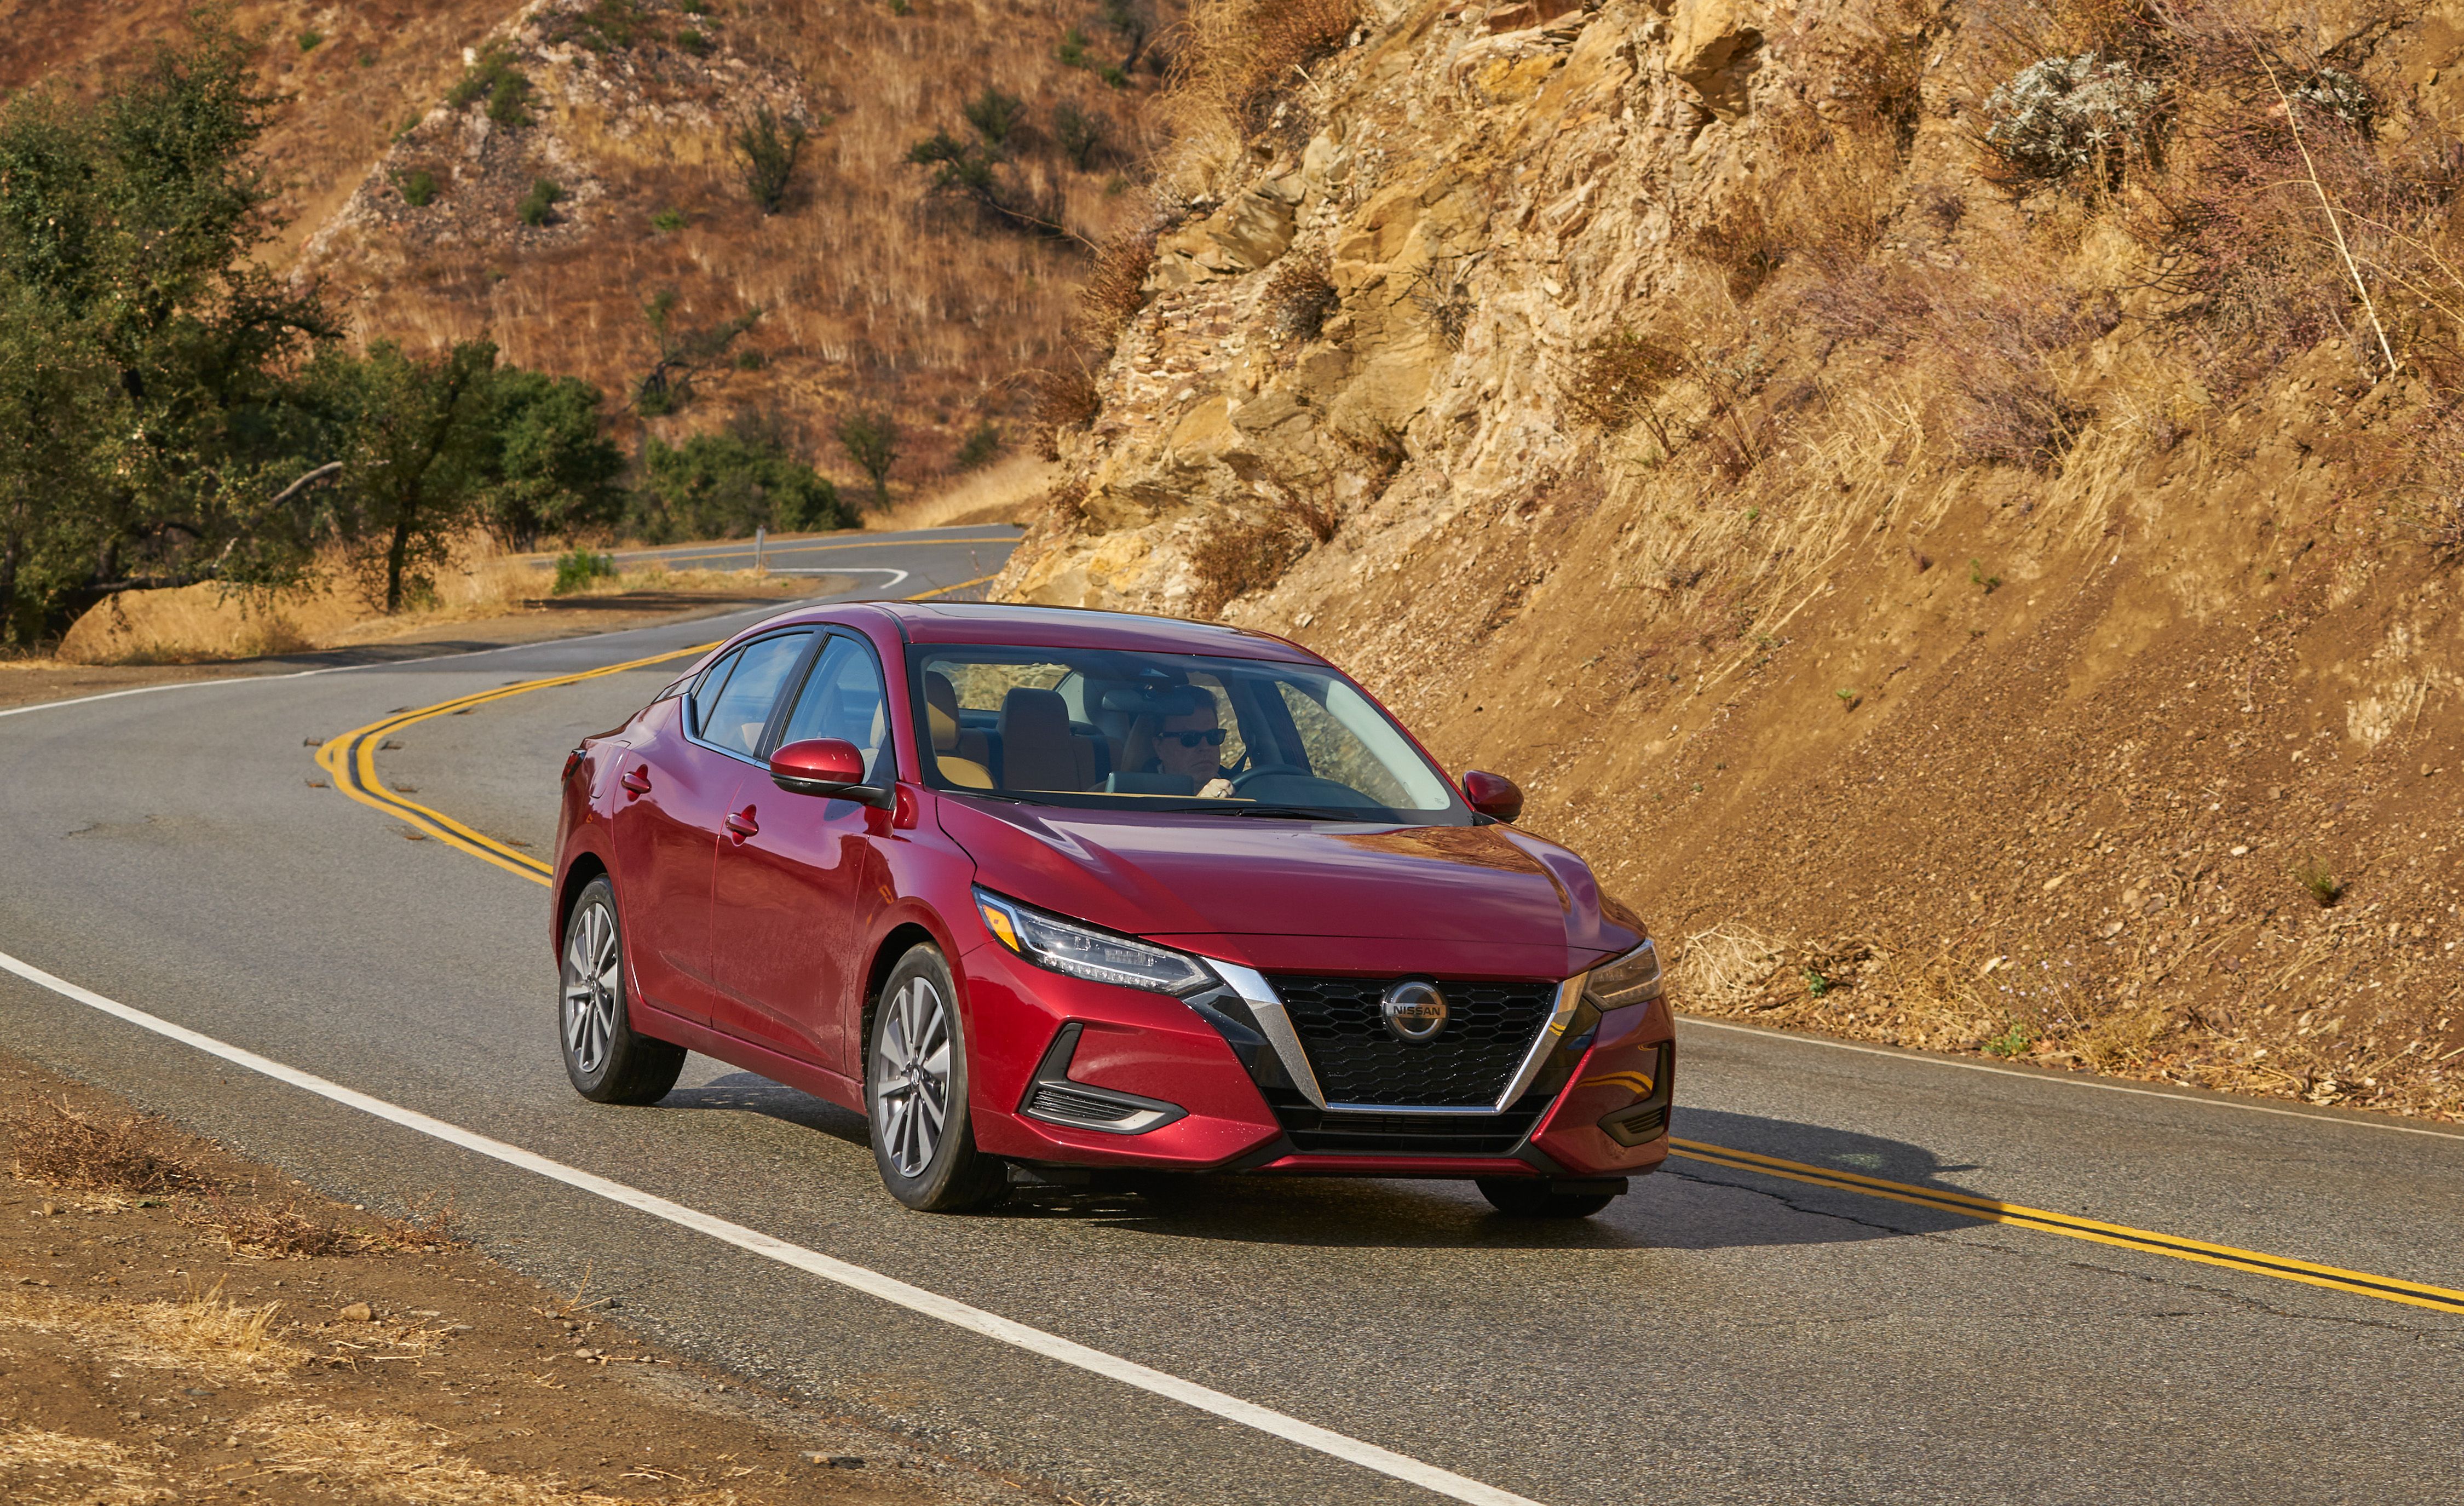 Comments on: 2020 Nissan Sentra Sedan Joins the Family - Car and Driver